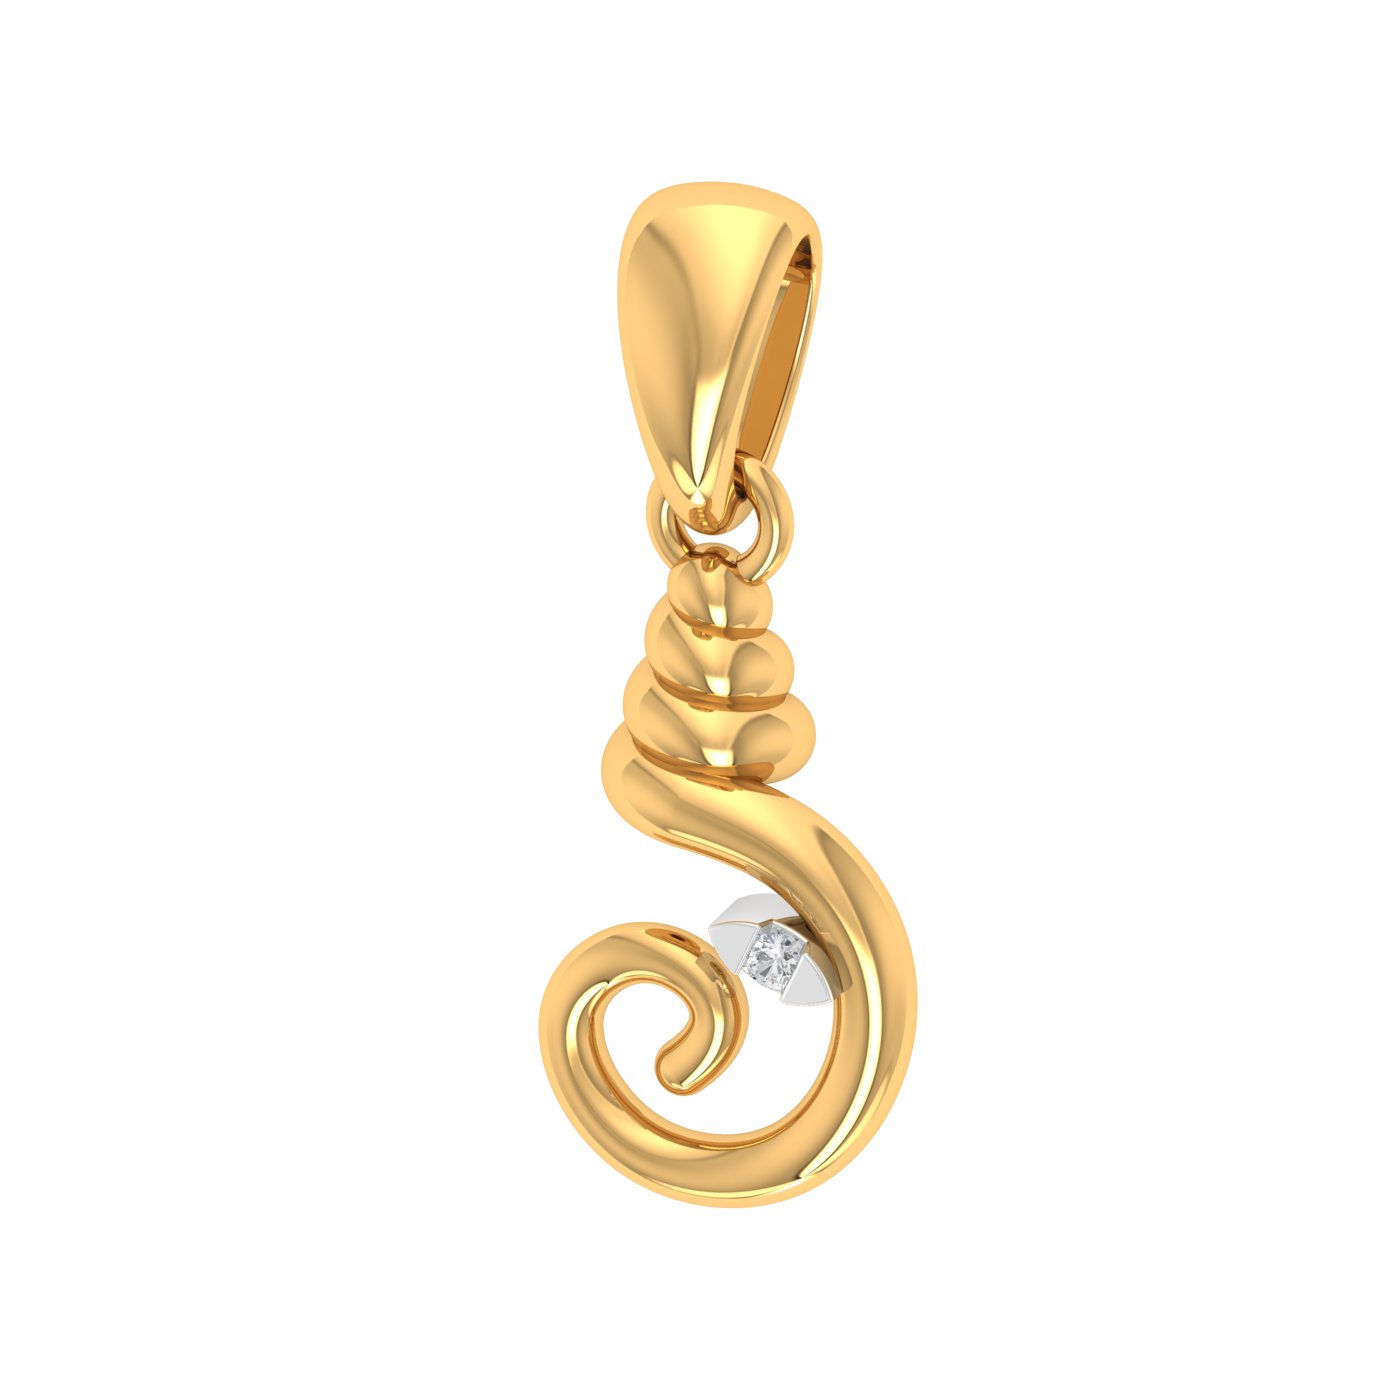 10 Exclusive Lord Ganesha Gold Pendant Designs